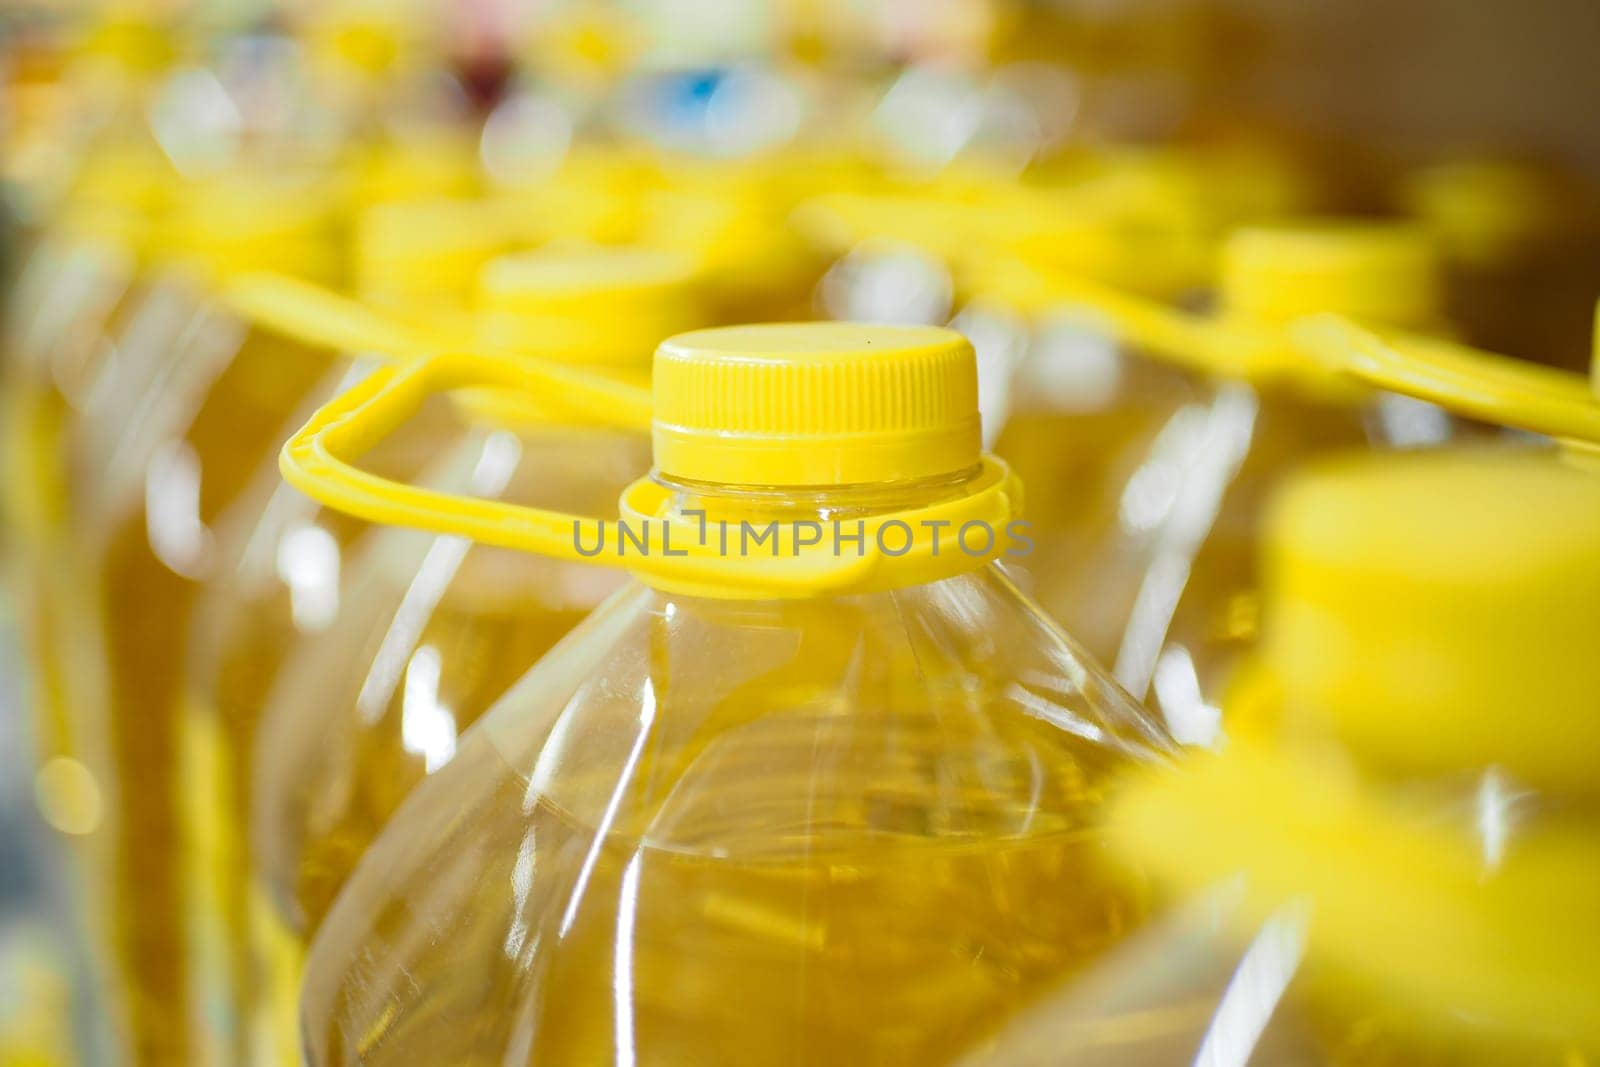 yellow sunflower oil bottle lined up in a store by towfiq007